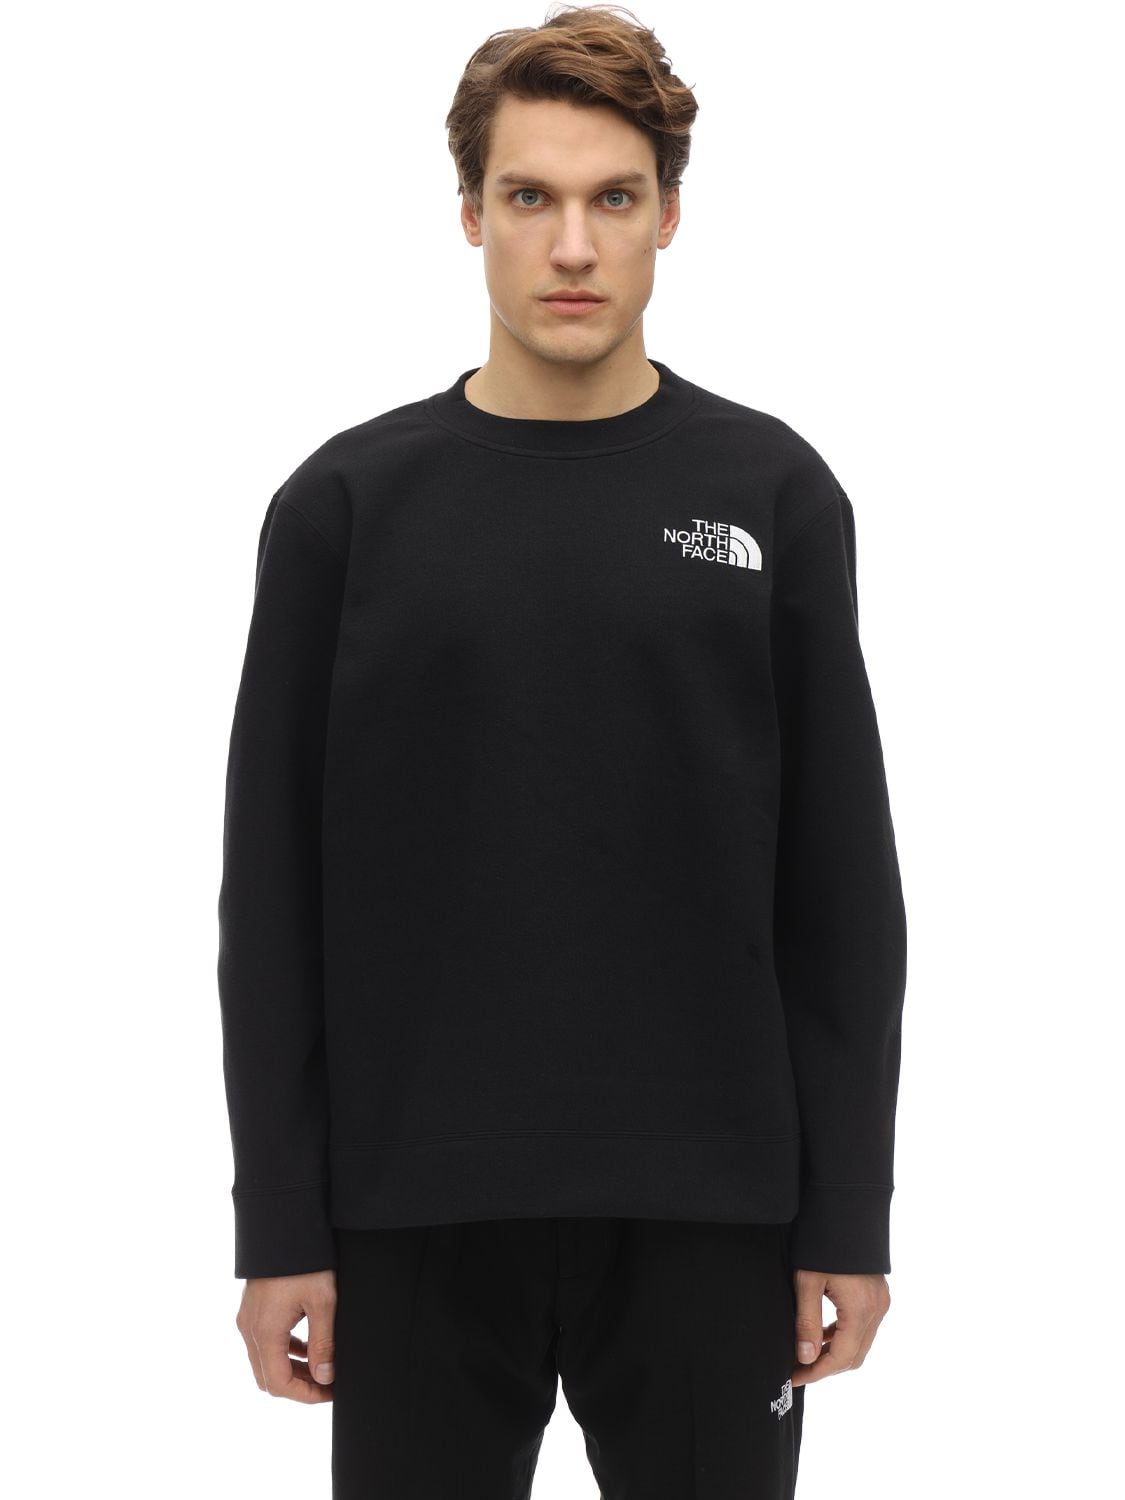 THE NORTH FACE SPACER KNIT SWEATSHIRT,71IVP3004-SKSZ0